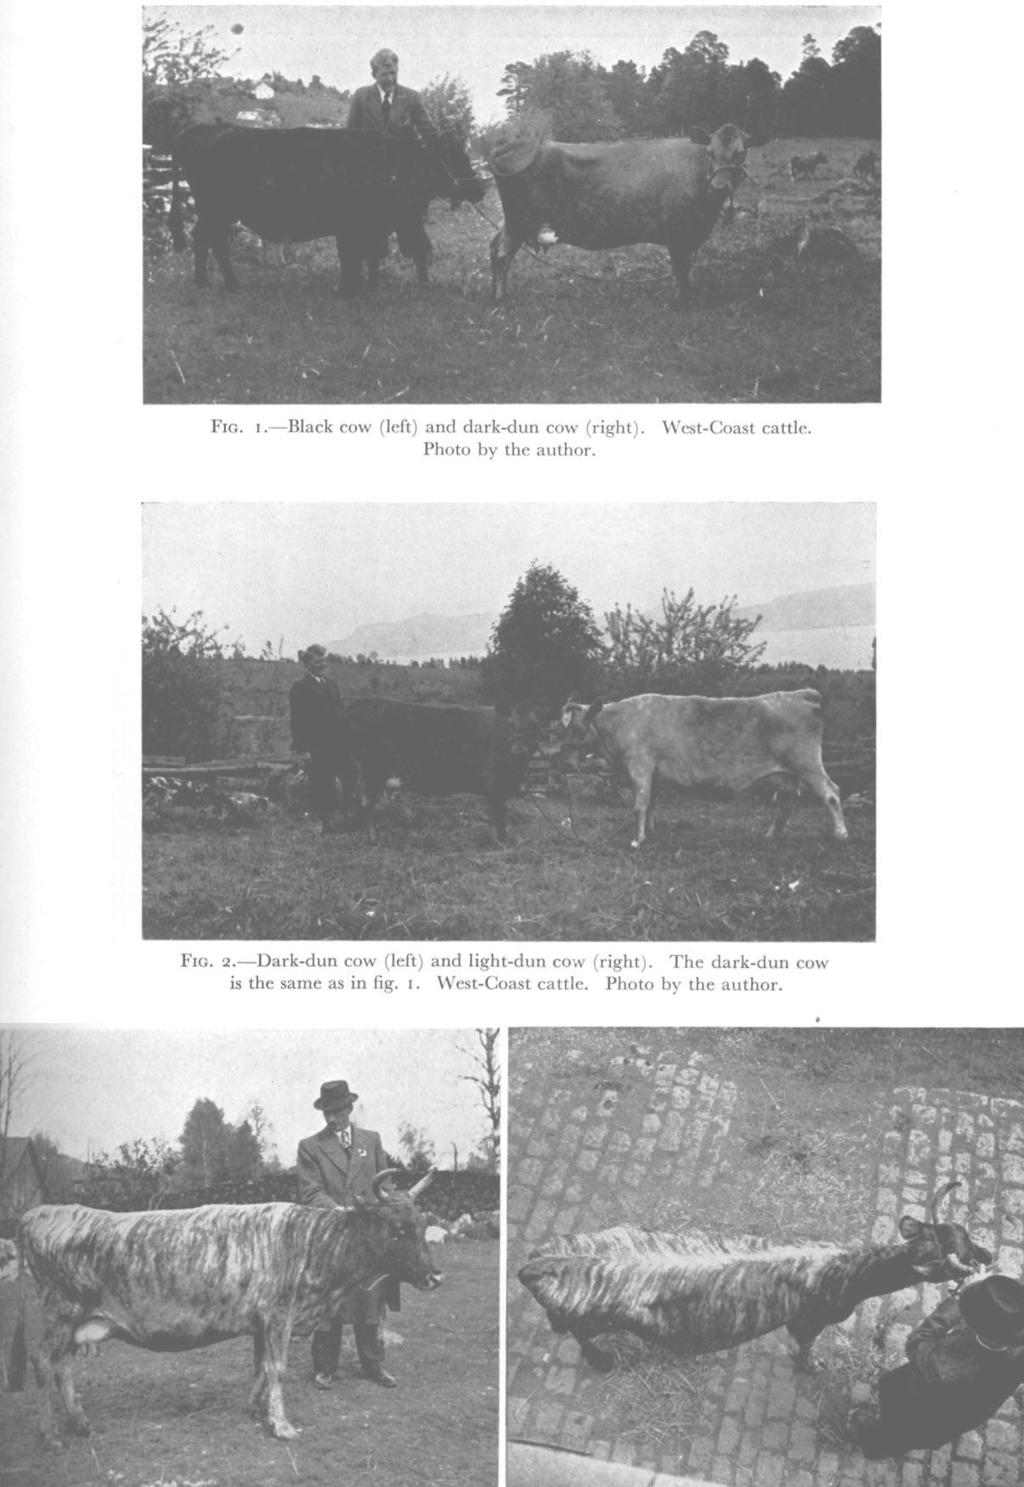 Fm. i Black cow (left) and dark-dun cow (right). West-Coast cattle. Photo by the author. FIG.. Dark-dun cow (left) and light-dun cow (right). The dark-dun cow is the same as in fig. r.